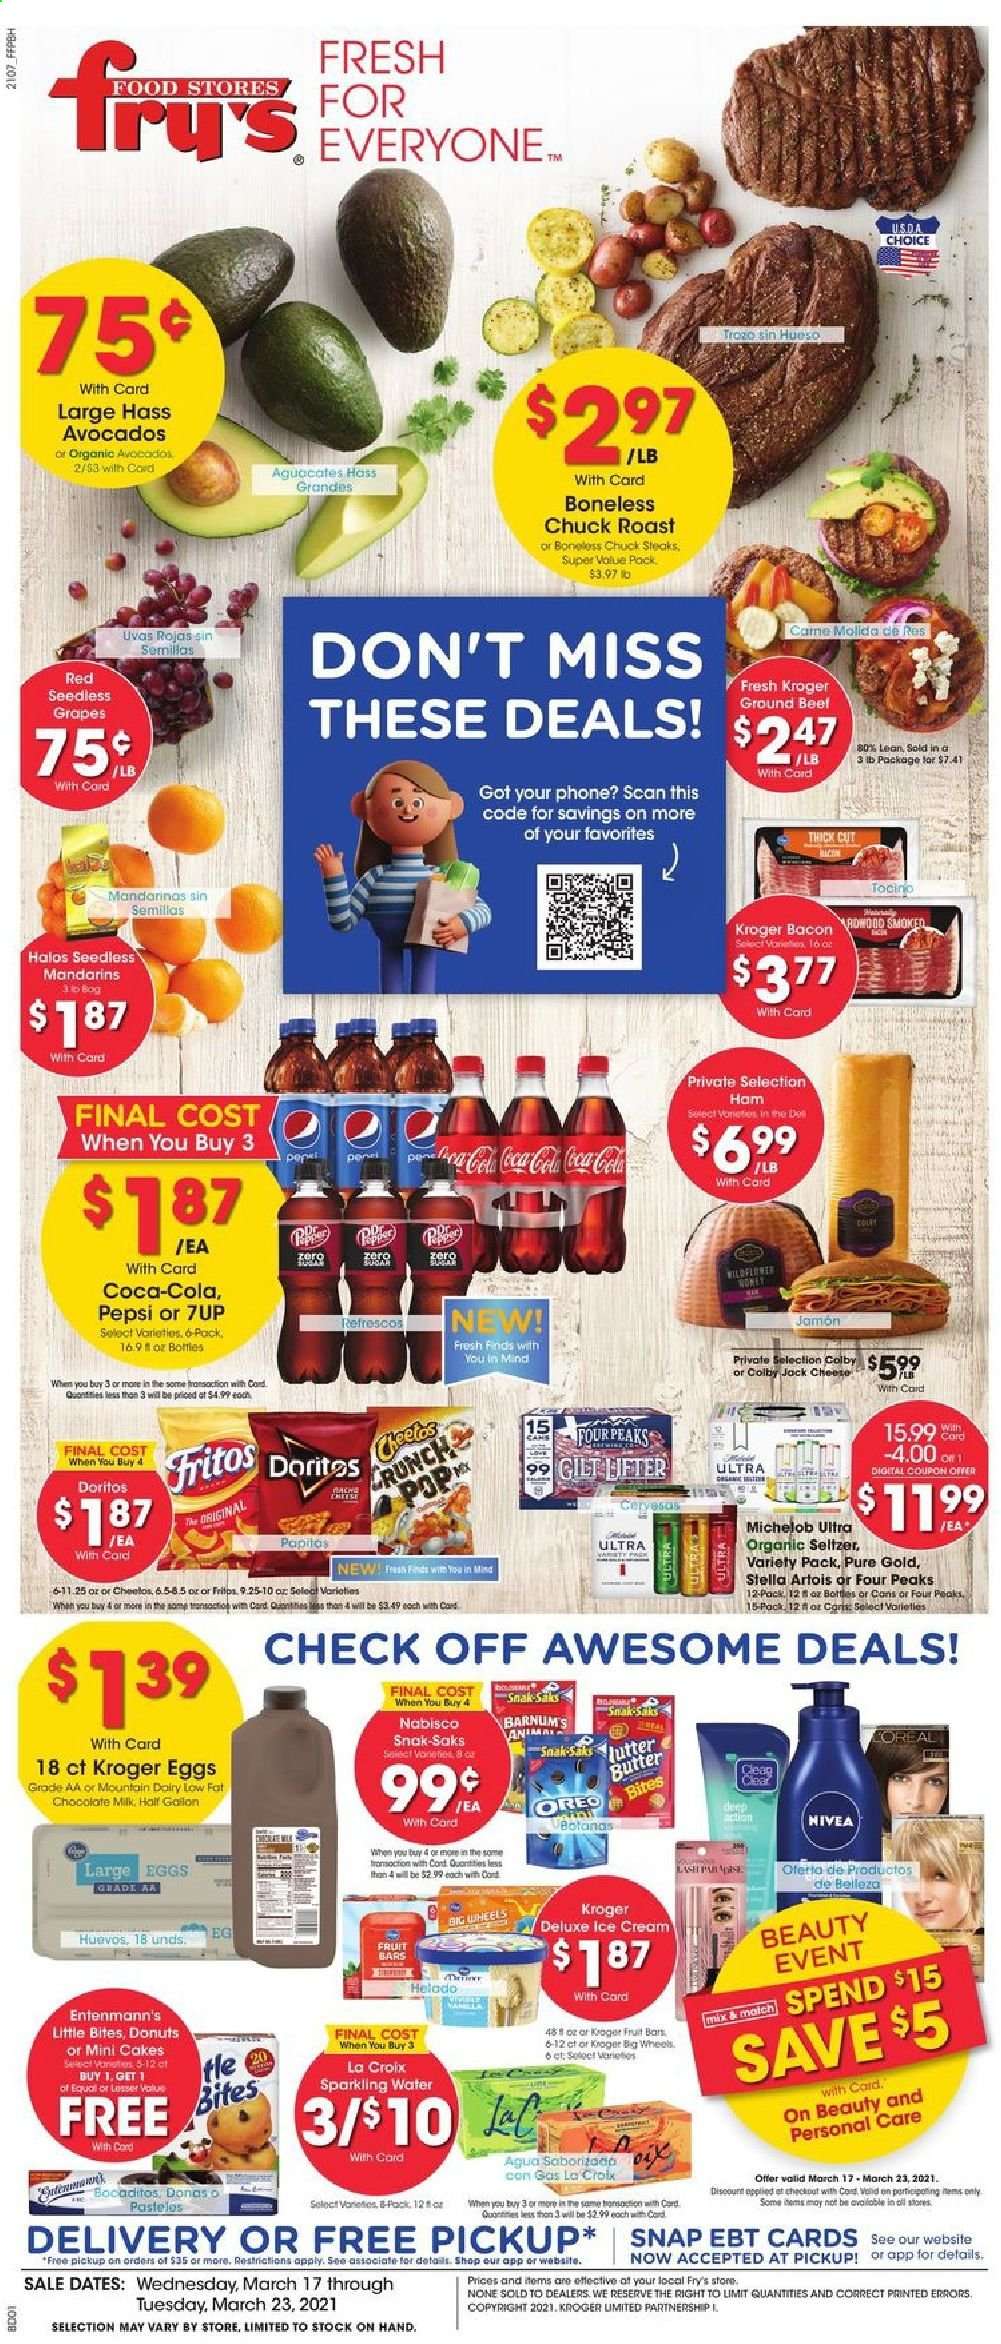 thumbnail - Fry’s Flyer - 03/17/2021 - 03/23/2021 - Sales products - cake, donut, Entenmann's, Little Bites, bacon, ham, Colby cheese, Oreo, milk, large eggs, butter, ice cream, chocolate, Doritos, mandarines, Fritos, Coca-Cola, Pepsi, 7UP, seltzer water, sparkling water, beer, Stella Artois, Michelob, beef meat, ground beef, steak, chuck roast, Nivea. Page 1.